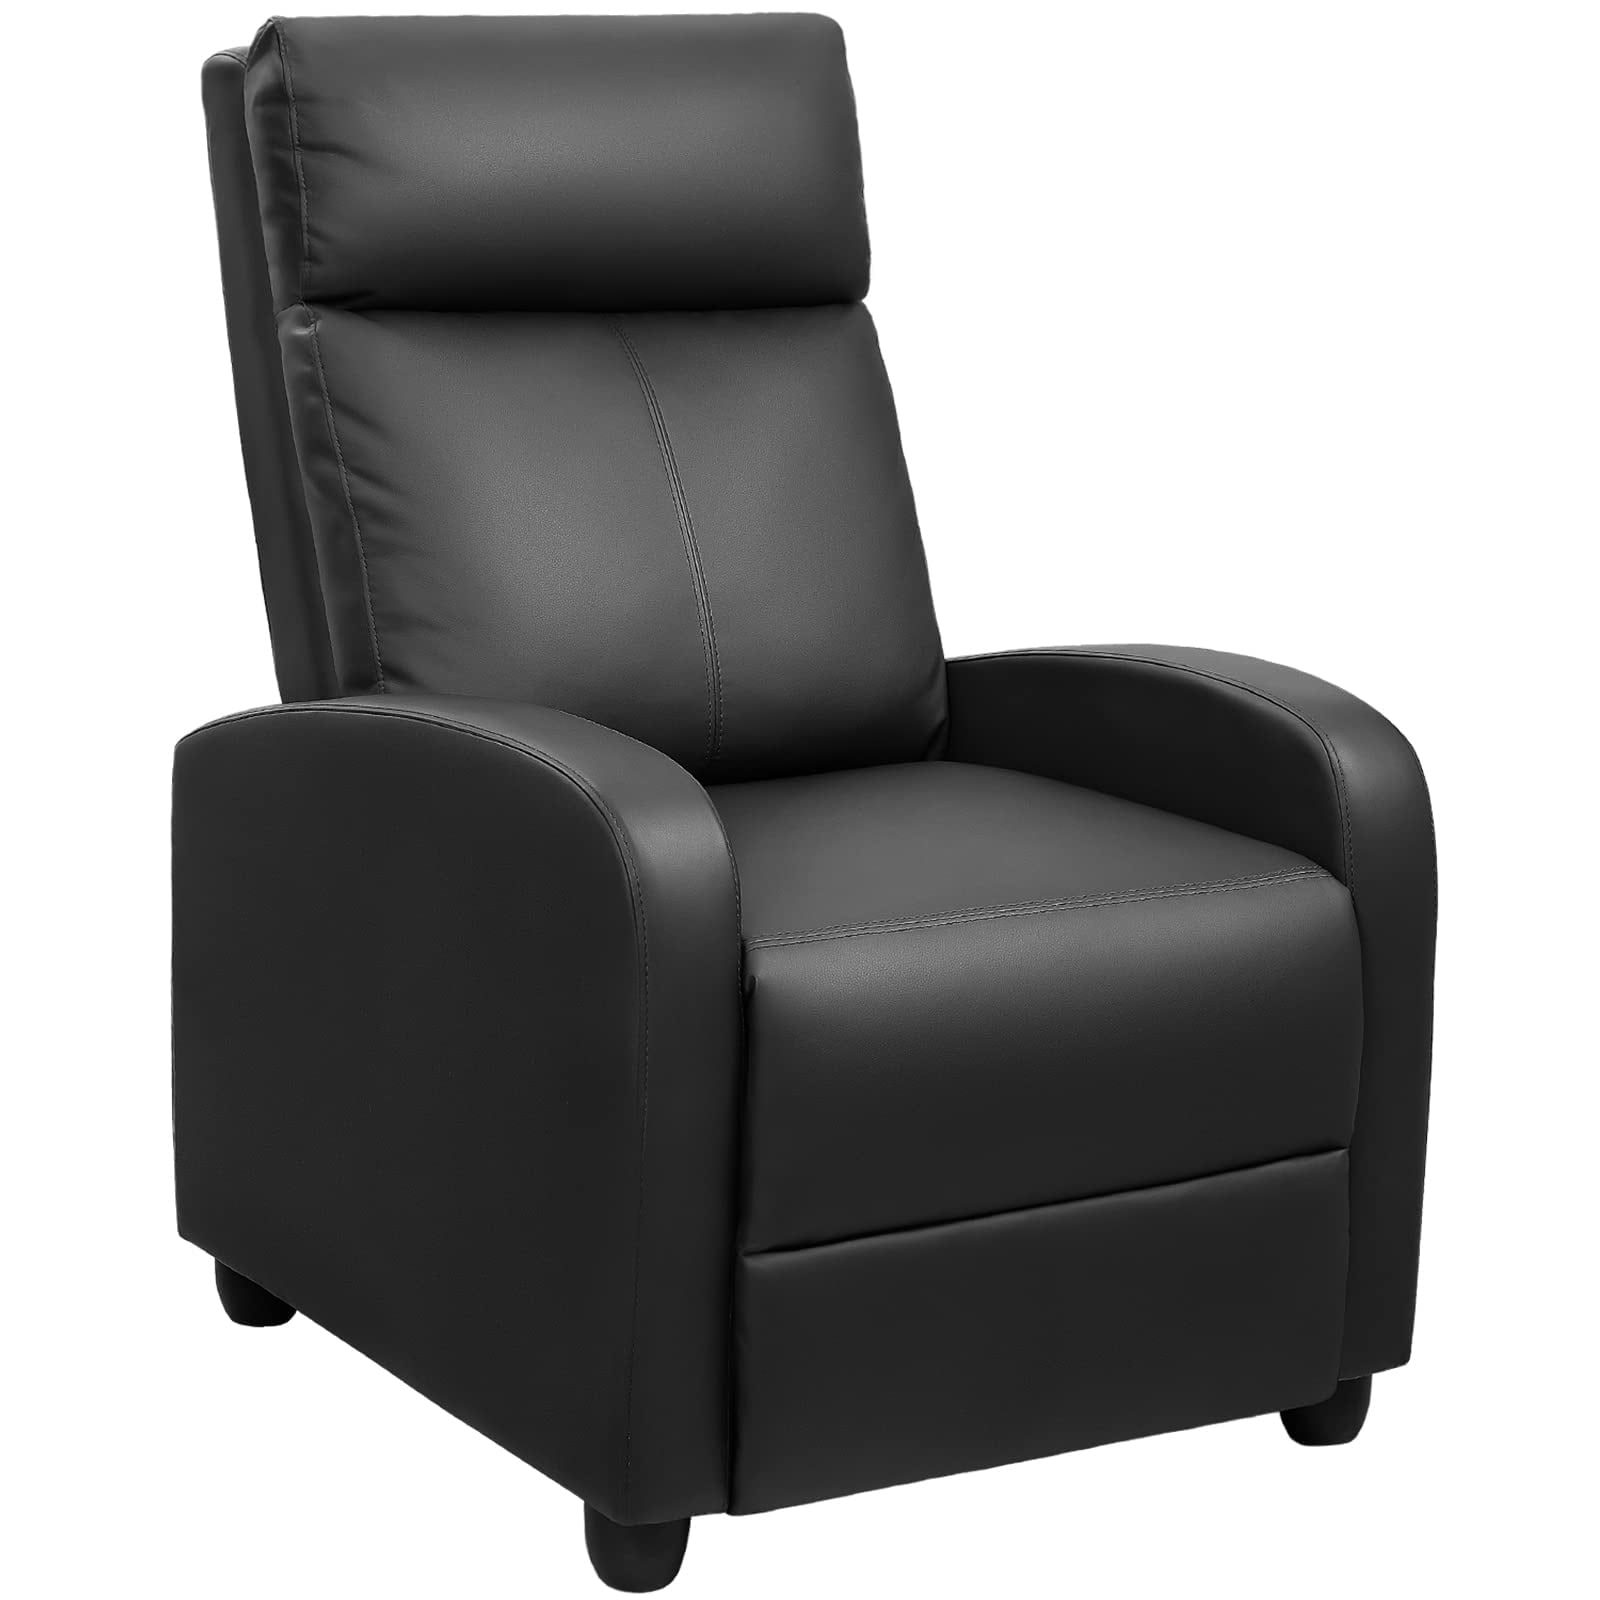 Recliner Chair Adjustable Home Theater Single Fabric Sofa Furniture With Thick Seat Cushion And Backrest Living Room Recliners